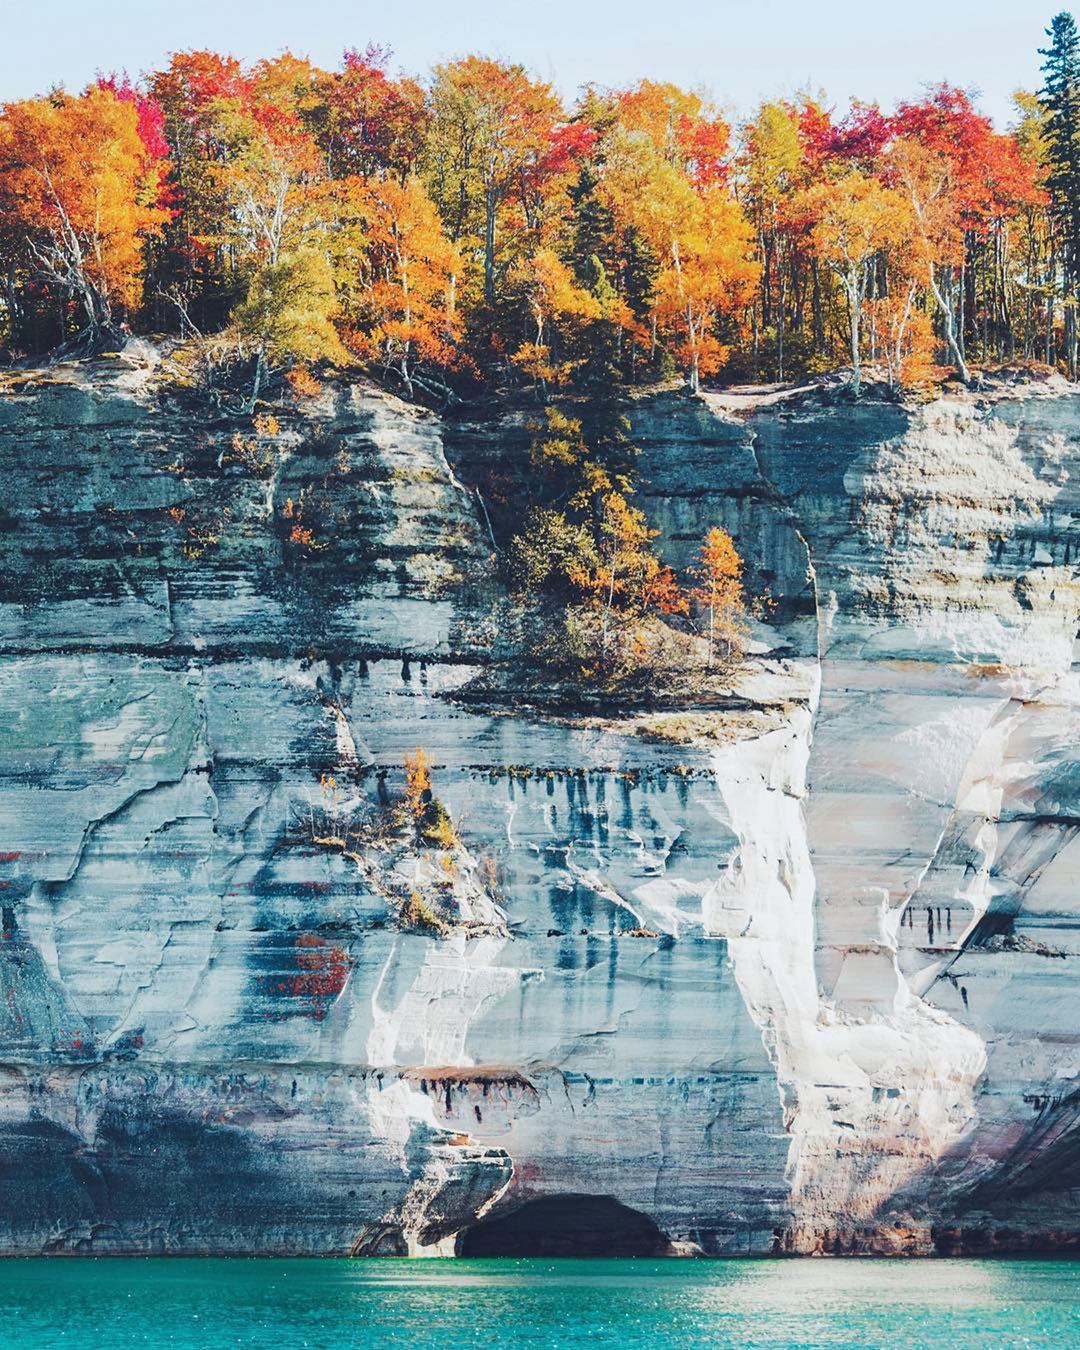 A portion of the Pictured Rocks seen aboard a Pictured Rocks Cruises’ tour. PC: Instagram user @little_pioneer